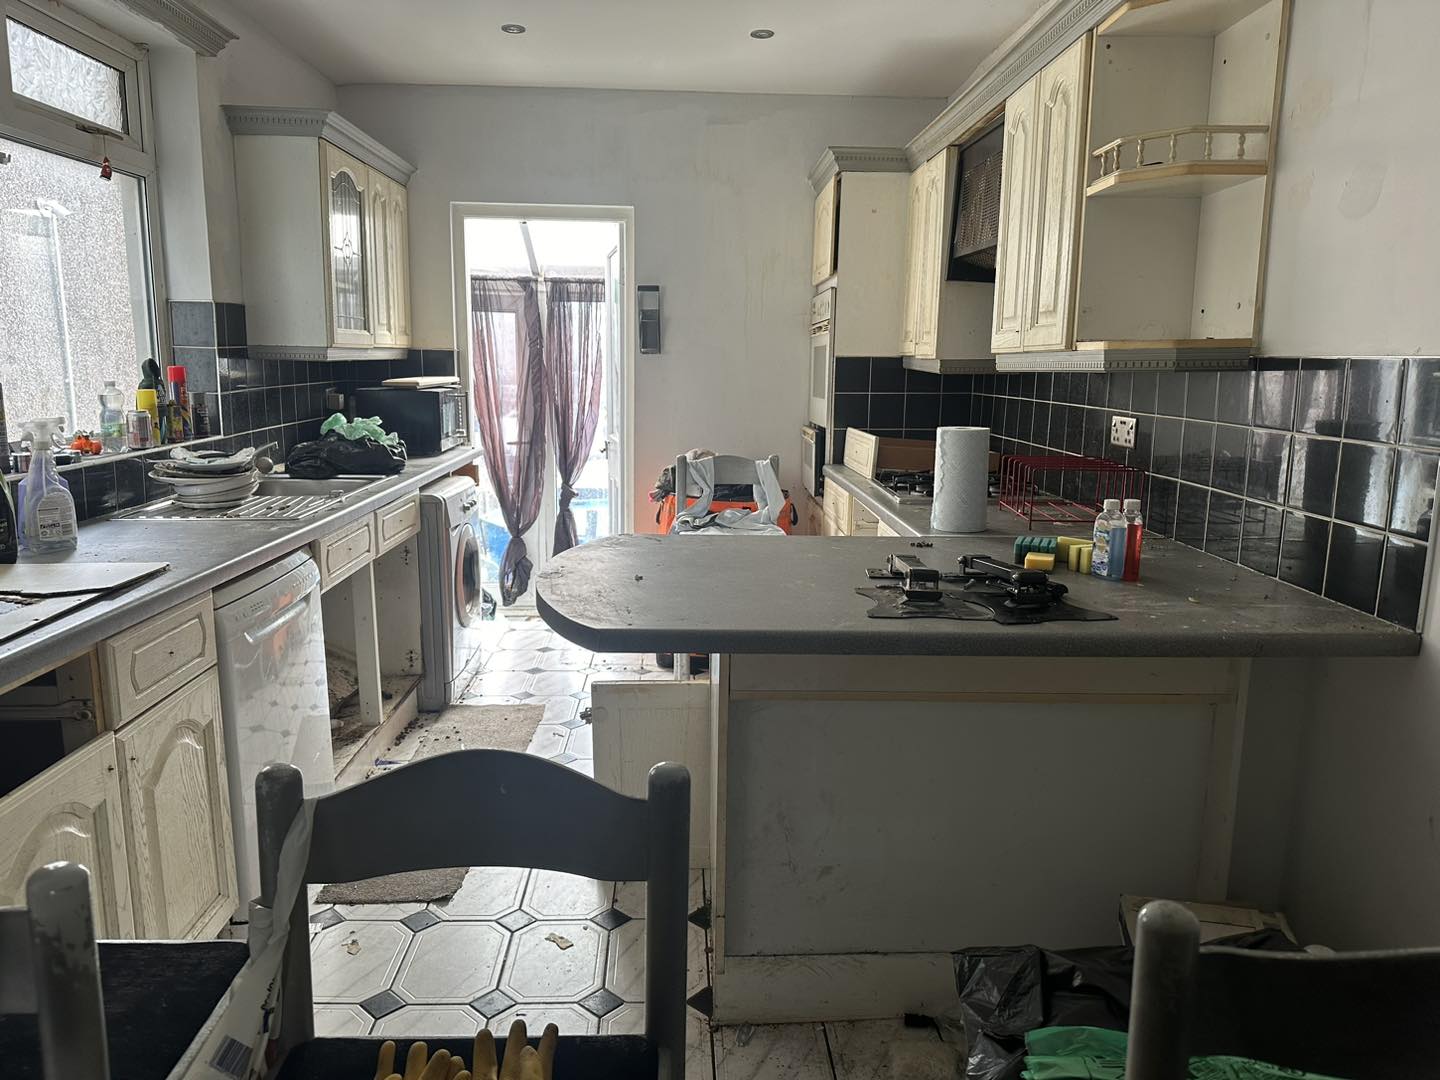 A photo of an old kitchen to be removed